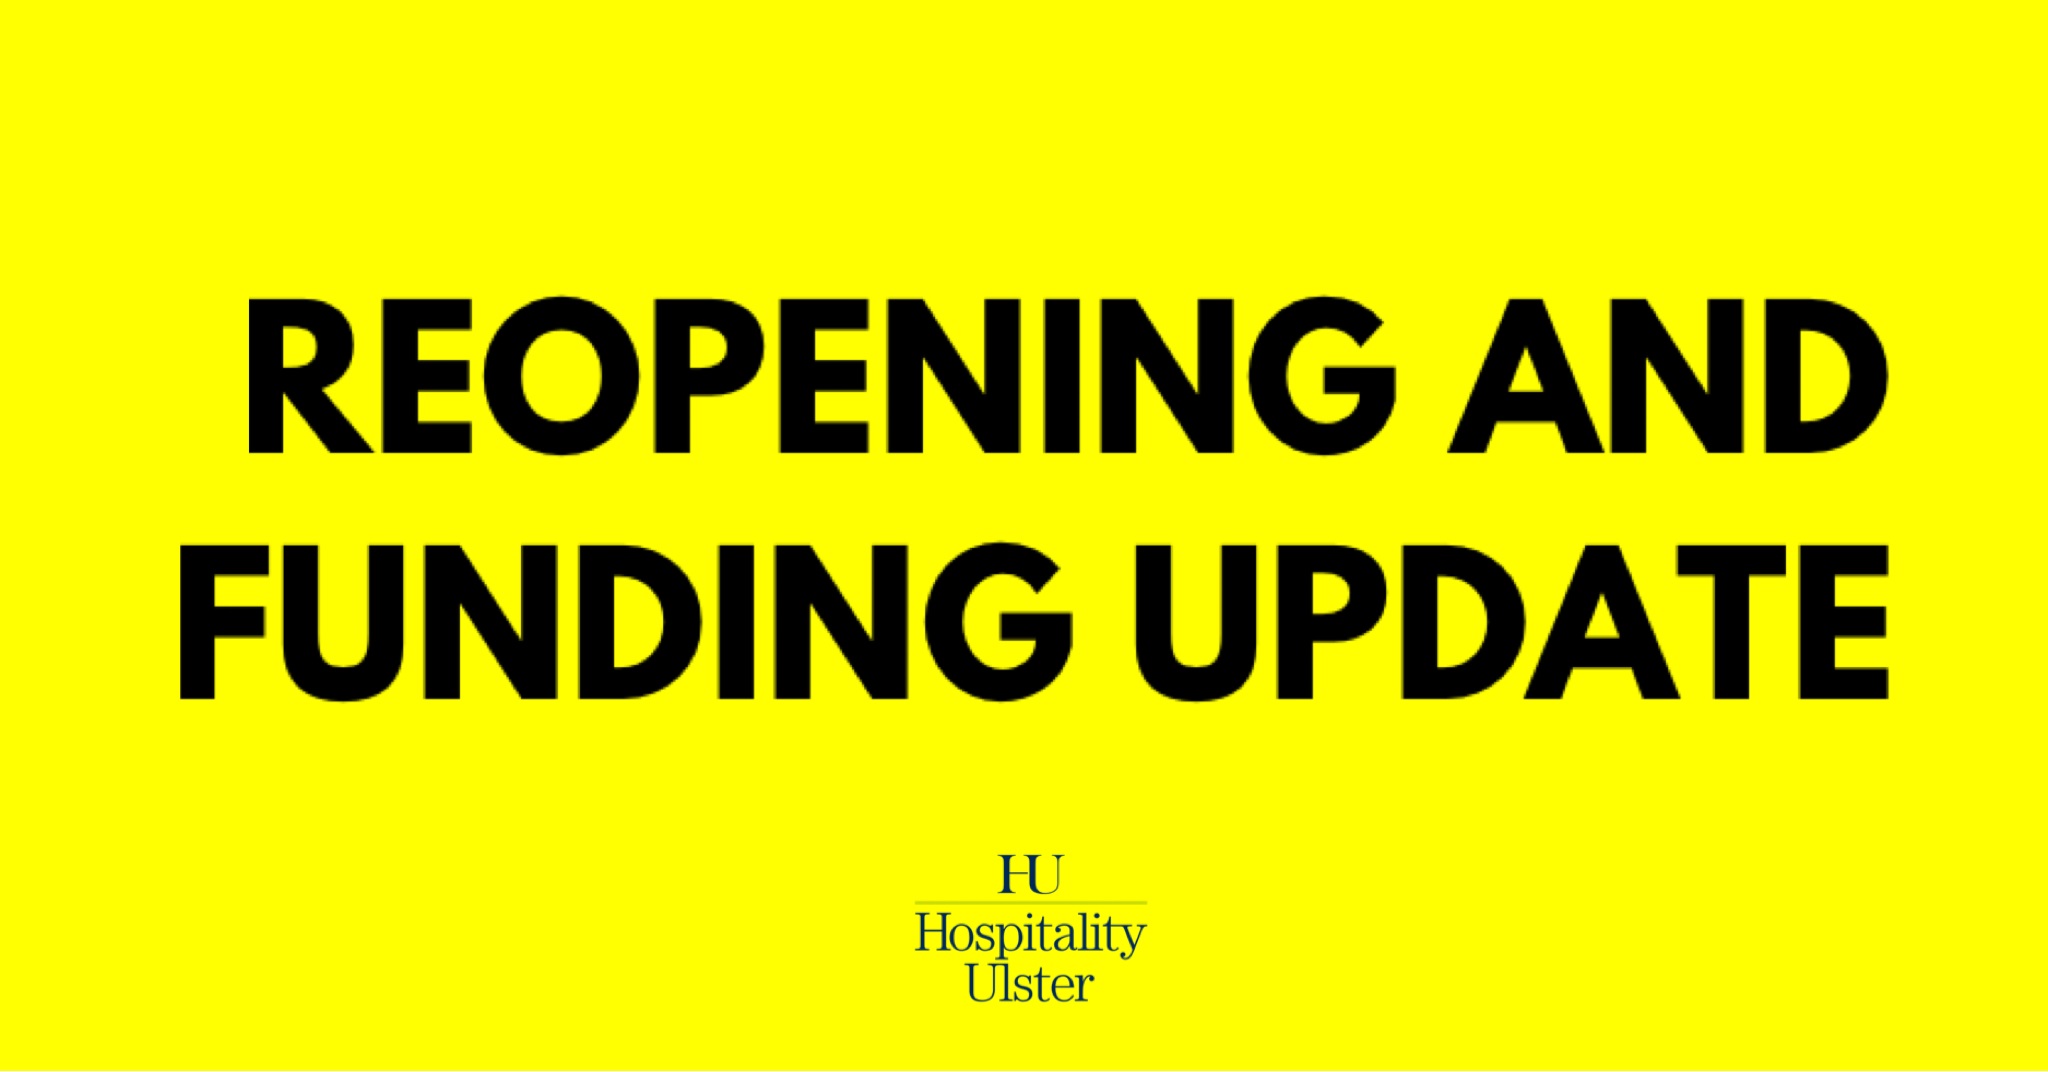 REOPENING AND FUNDING UPDATE